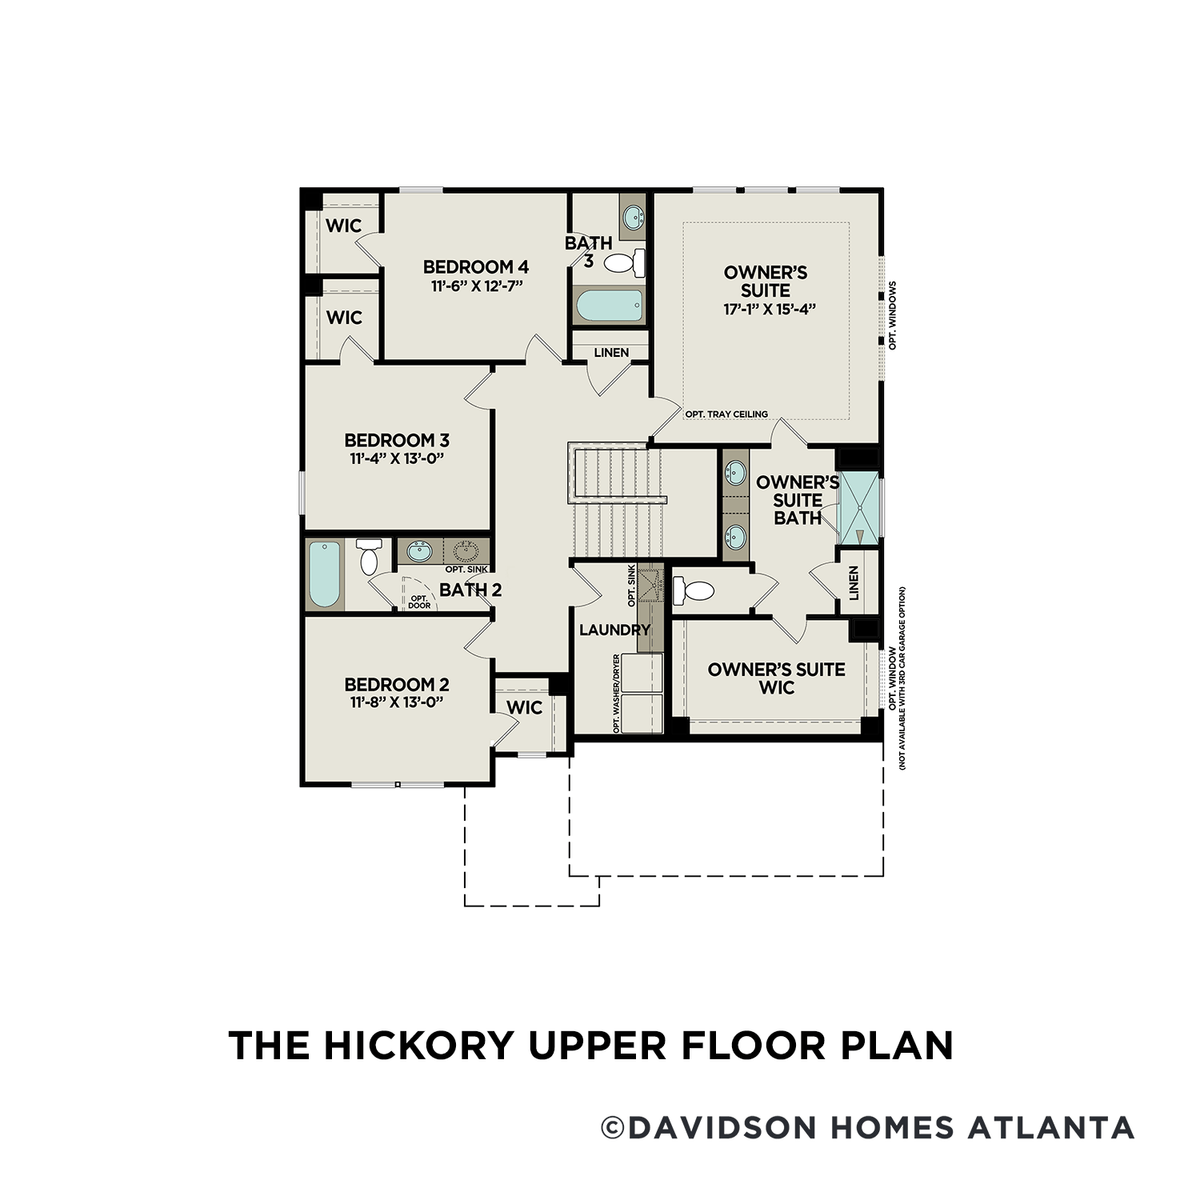 2 - The Hickory B floor plan layout for 165 Riverwood Drive in Davidson Homes' Riverwood community.